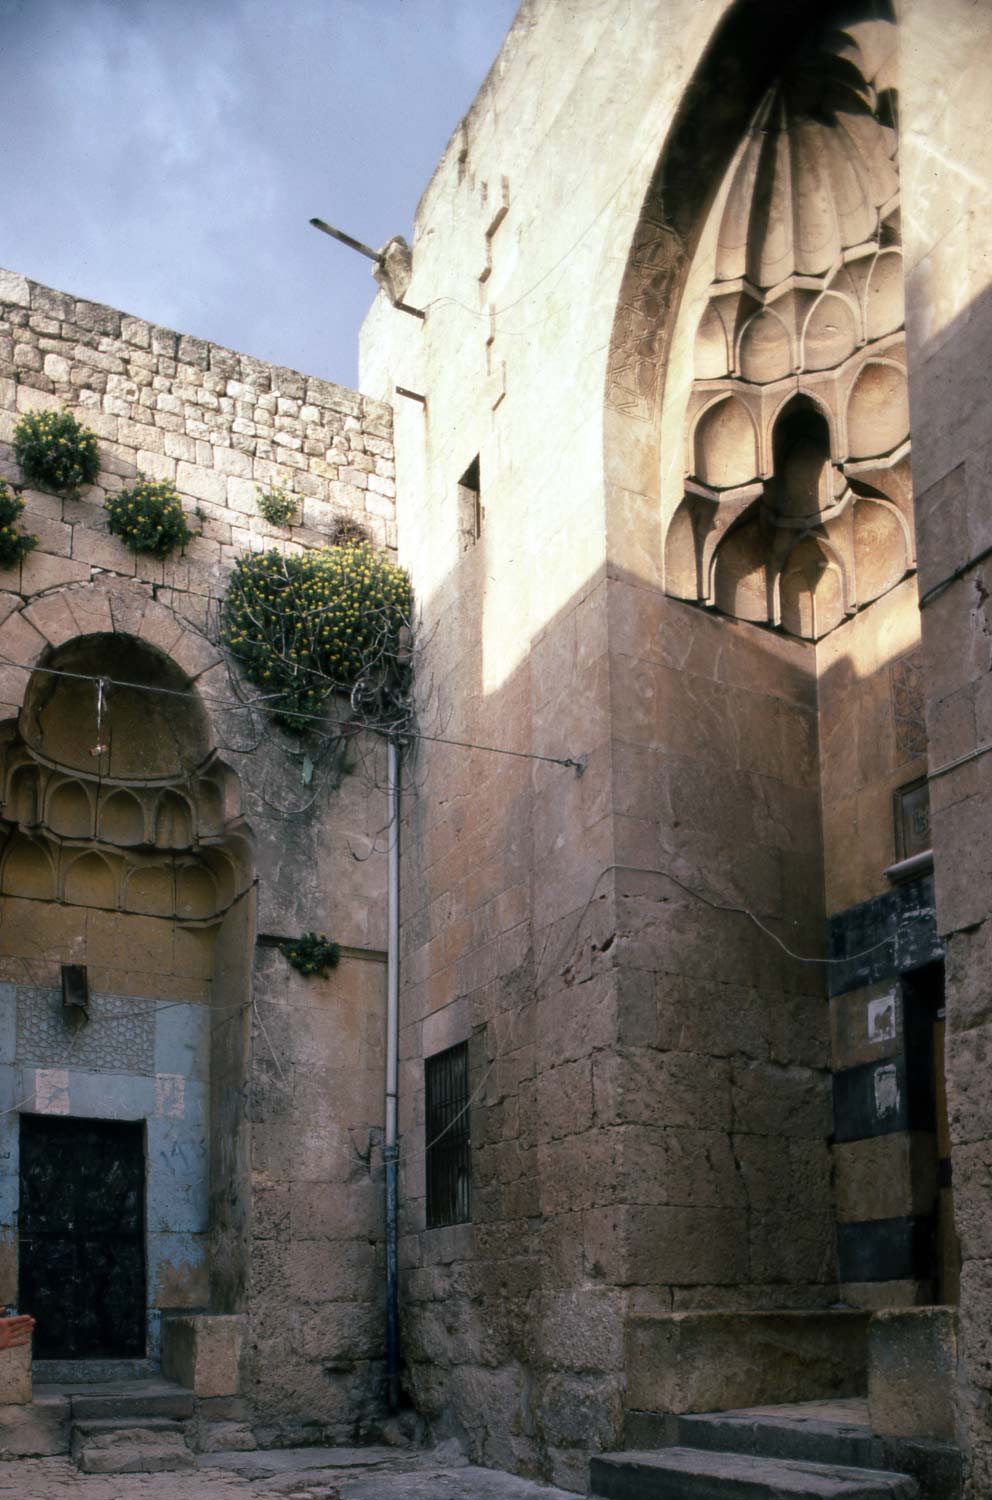 Close view of entrance portals, with small north portal to residential unit at left and larger entrance portal to madrasa at right.